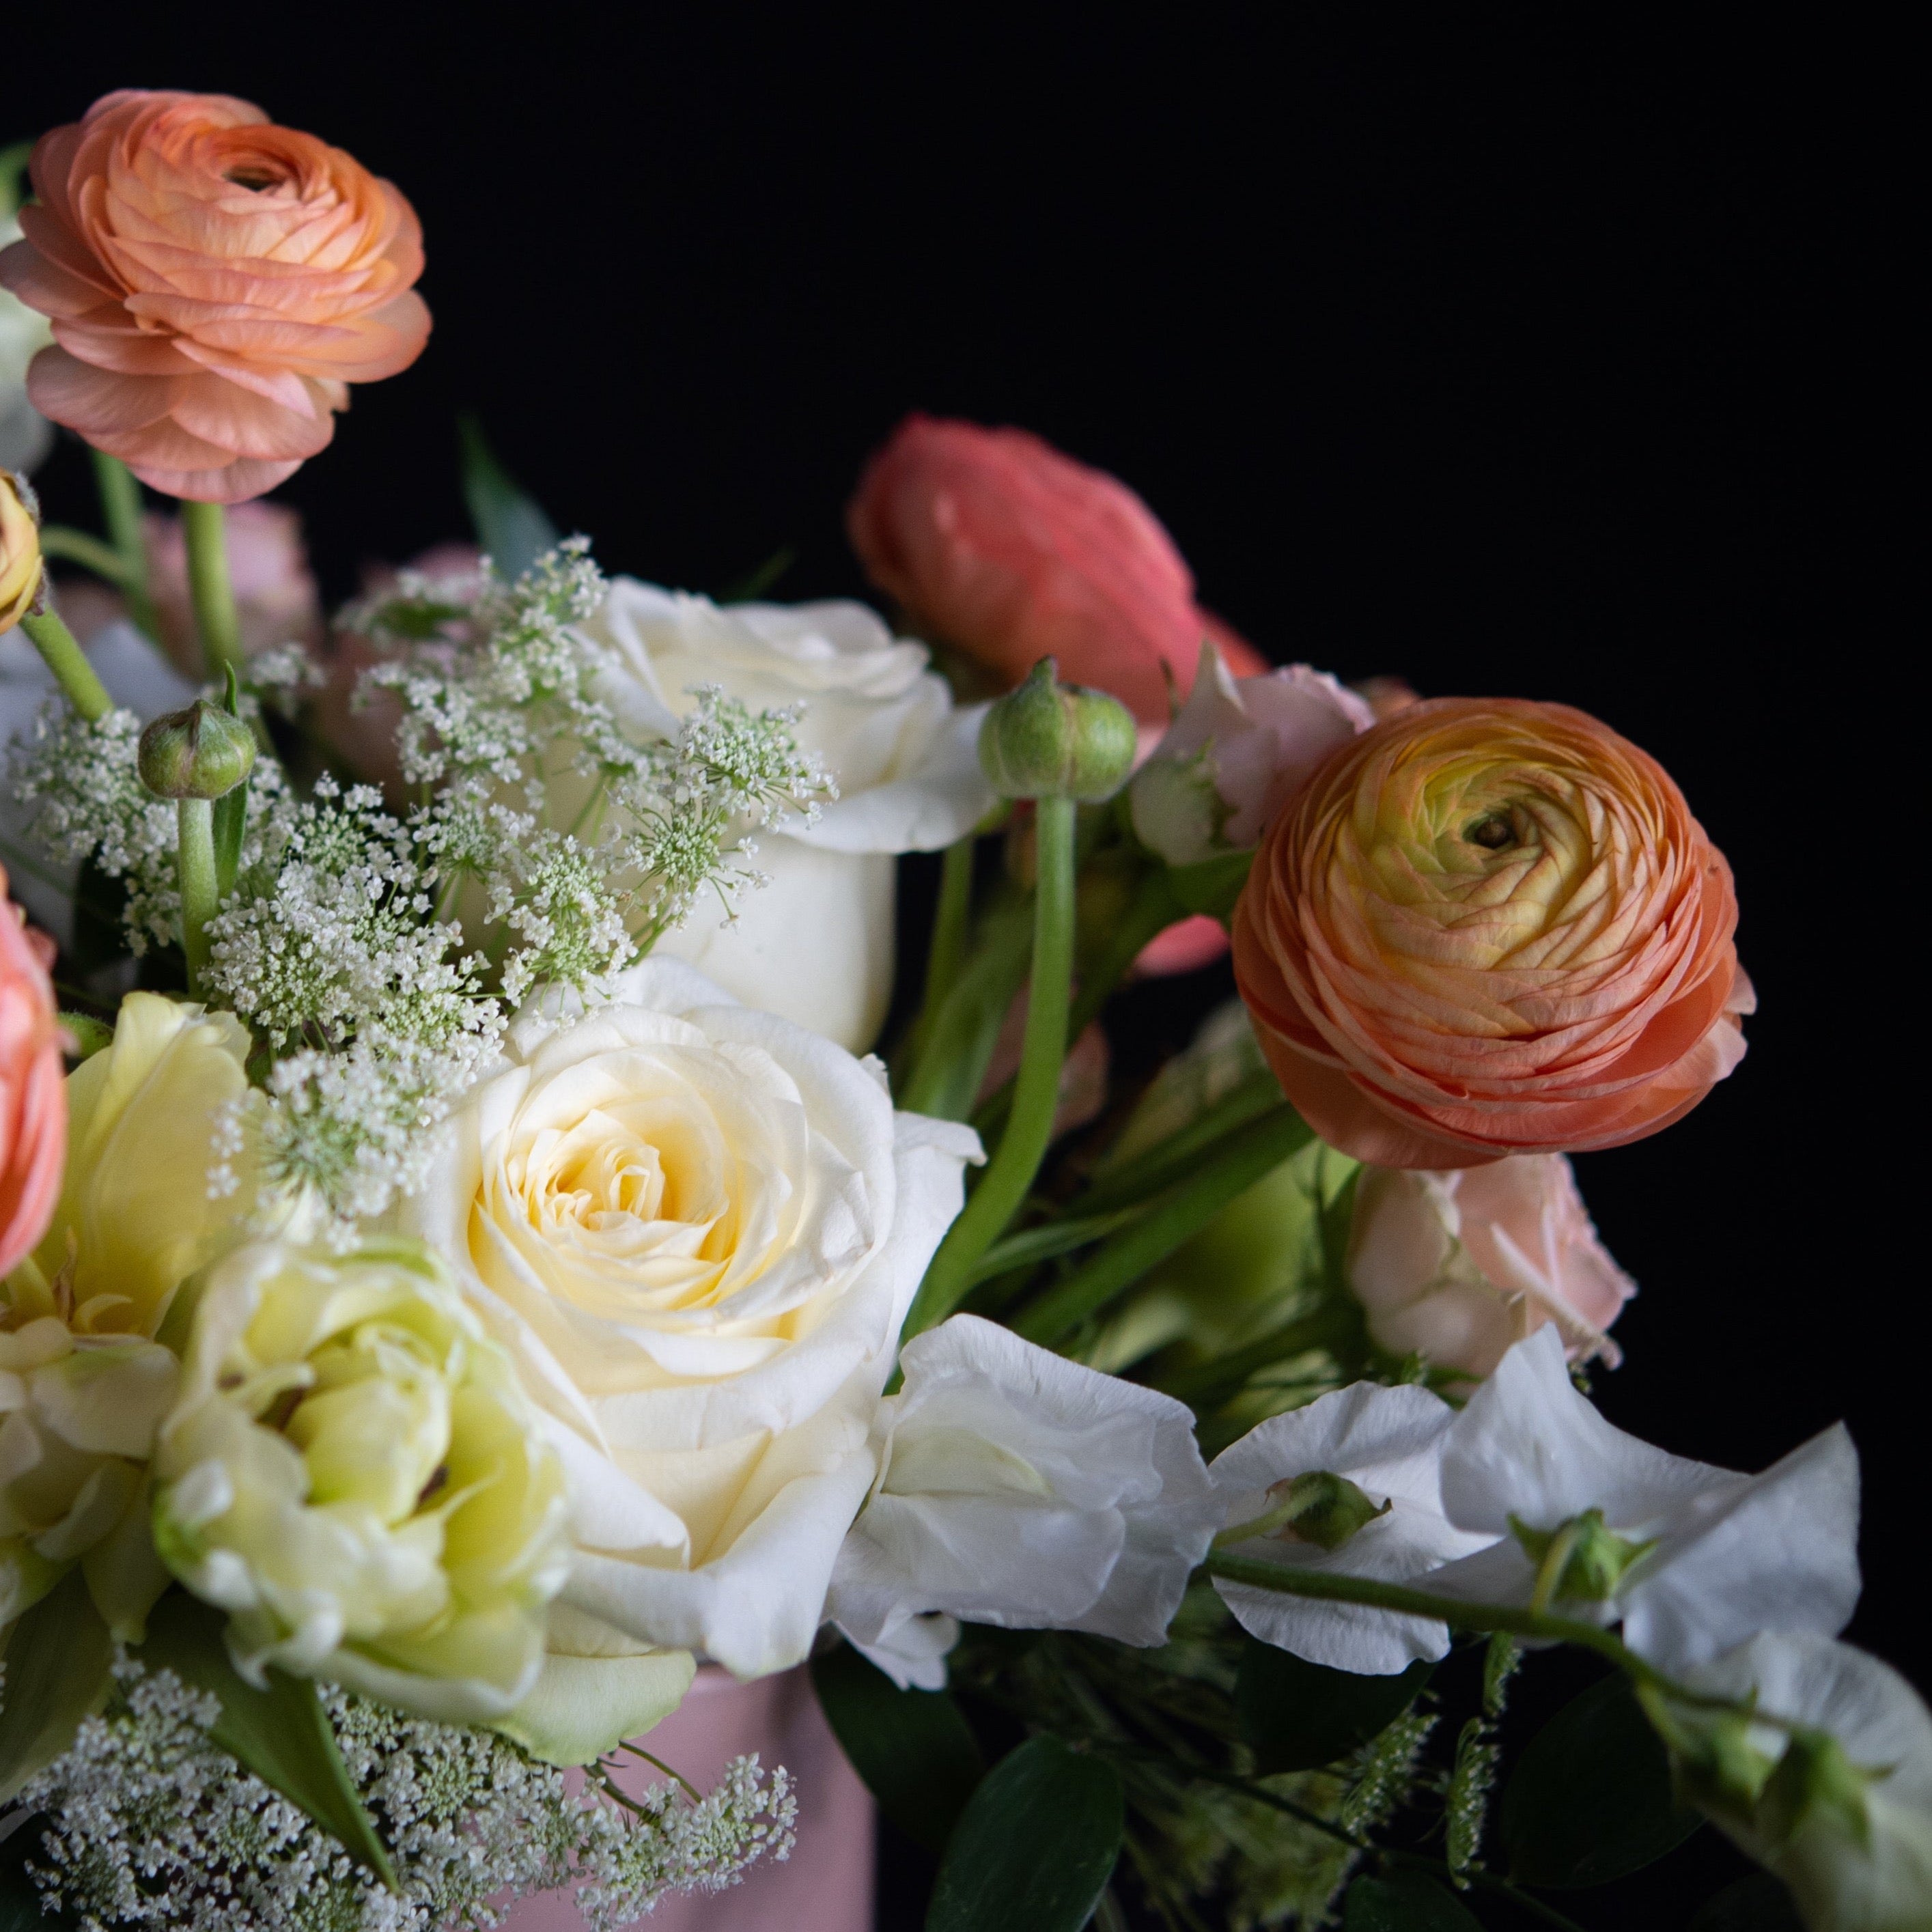 Ranunculus, tulips, hydrangea and roses for Mother's Day. 